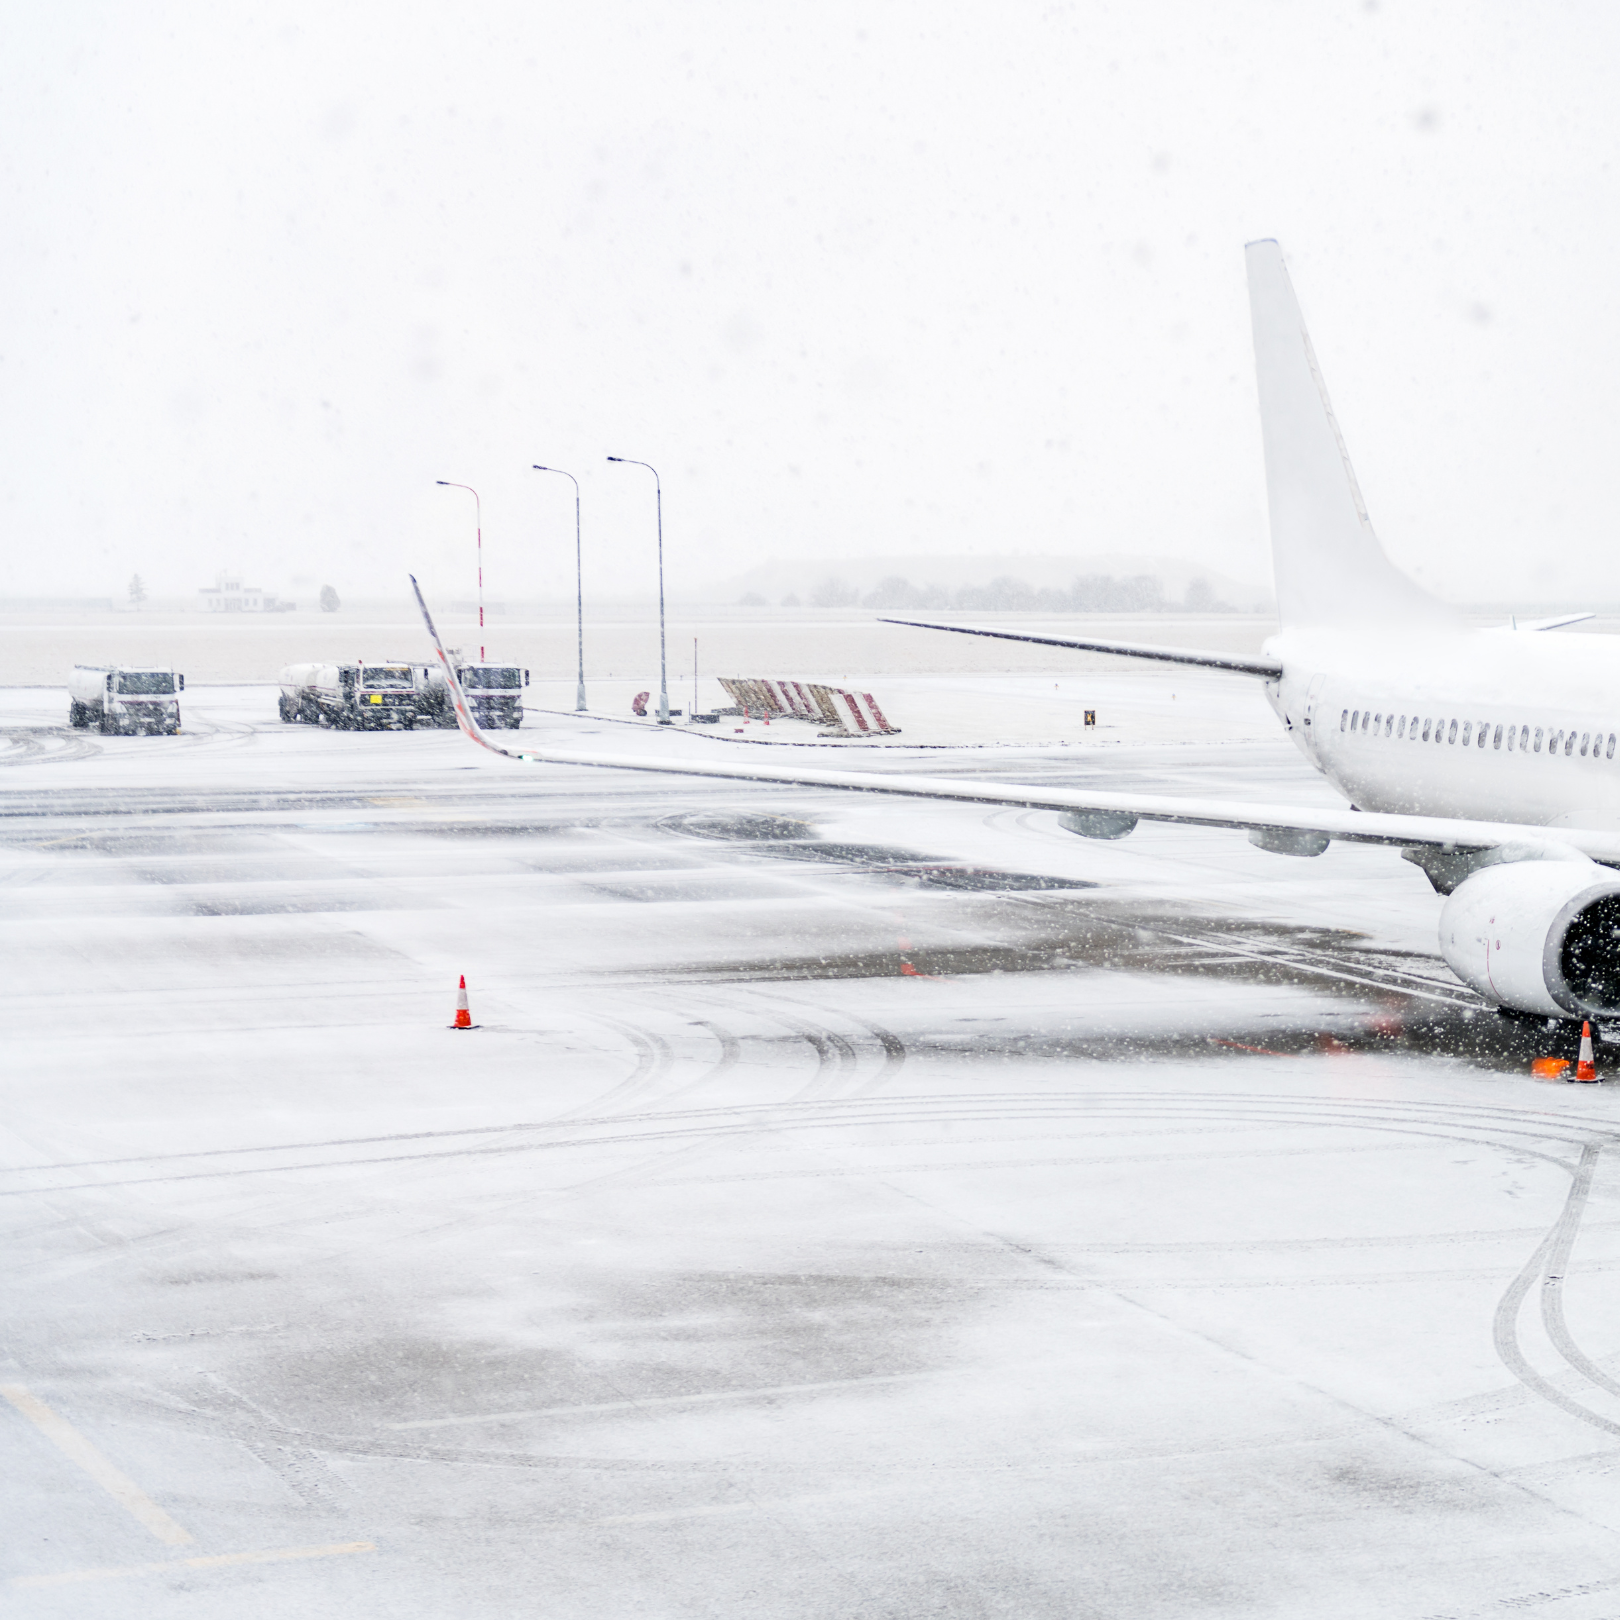 Snow management at airports is critical to operations. Image shows an airport runway with light dusting of snowfall.